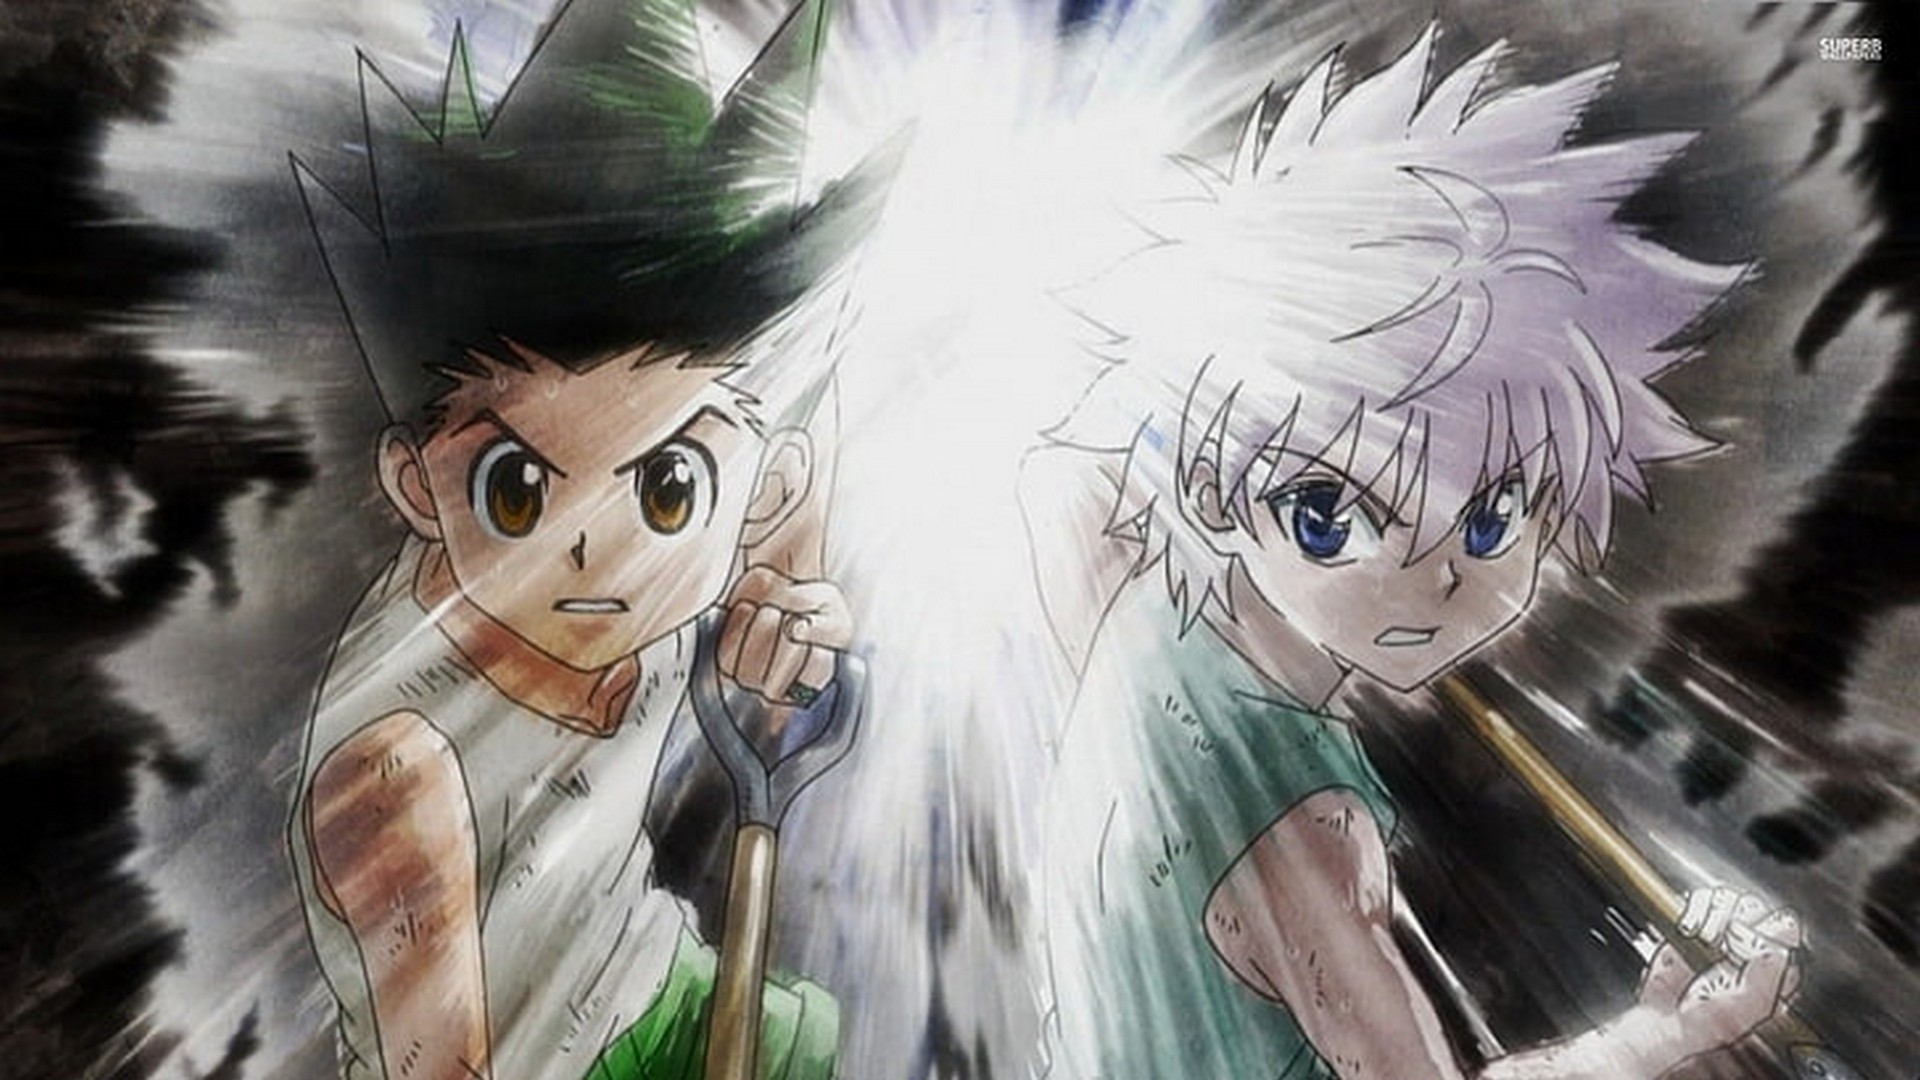 Computer Wallpapers Gon And Killua With high-resolution 1920X1080 pixel. You can use this wallpaper for your Windows and Mac OS computers as well as your Android and iPhone smartphones